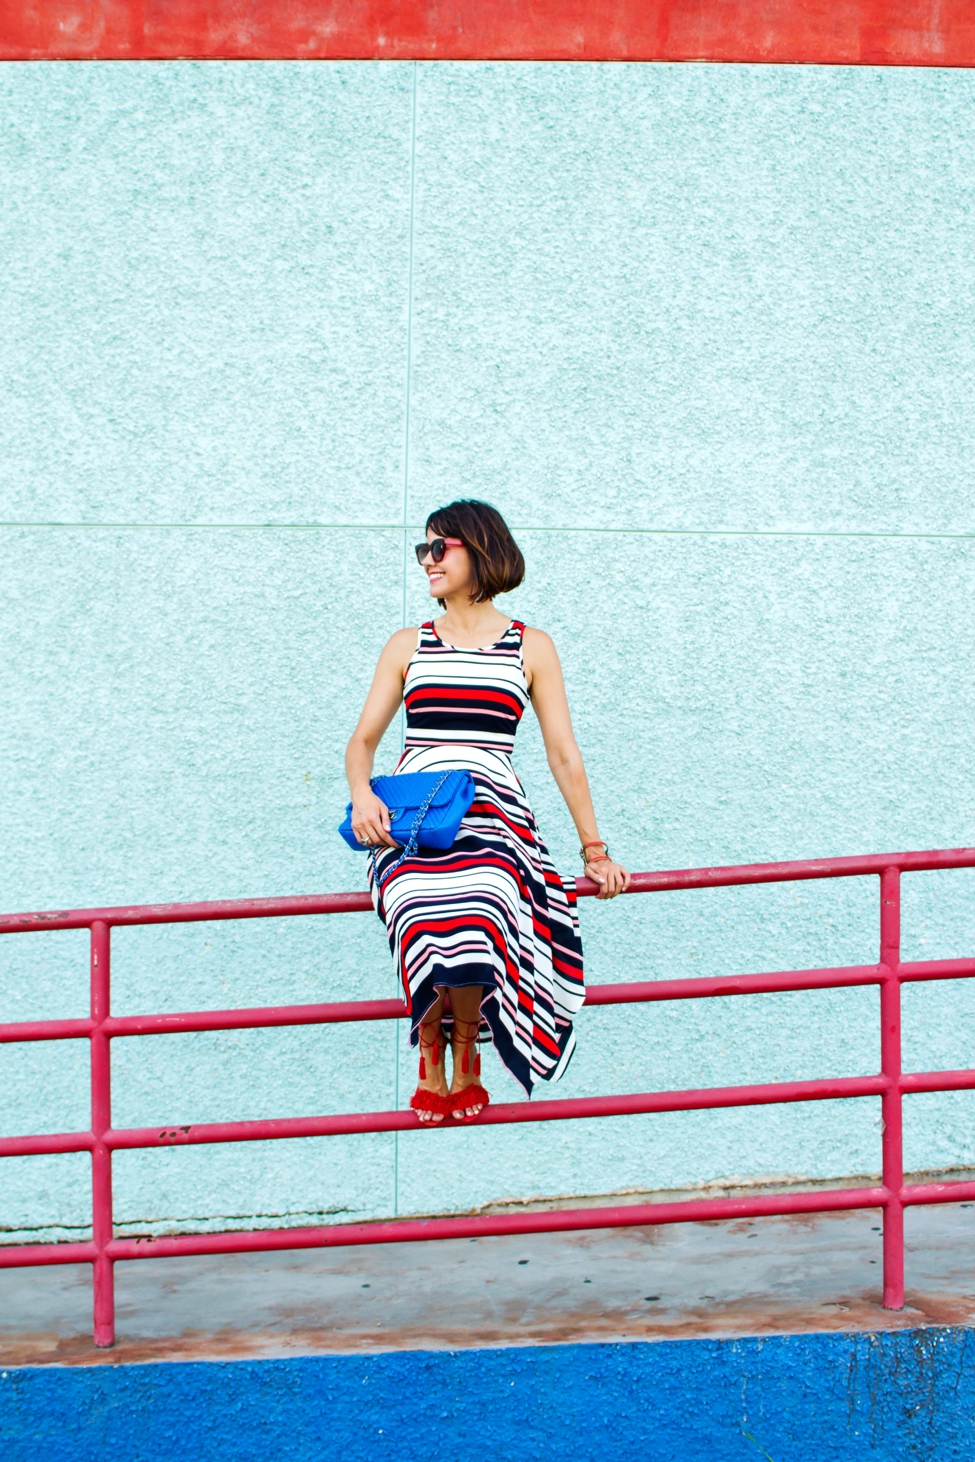 Wear Where Well ModCloth Workwear Red White Blue dress_0006